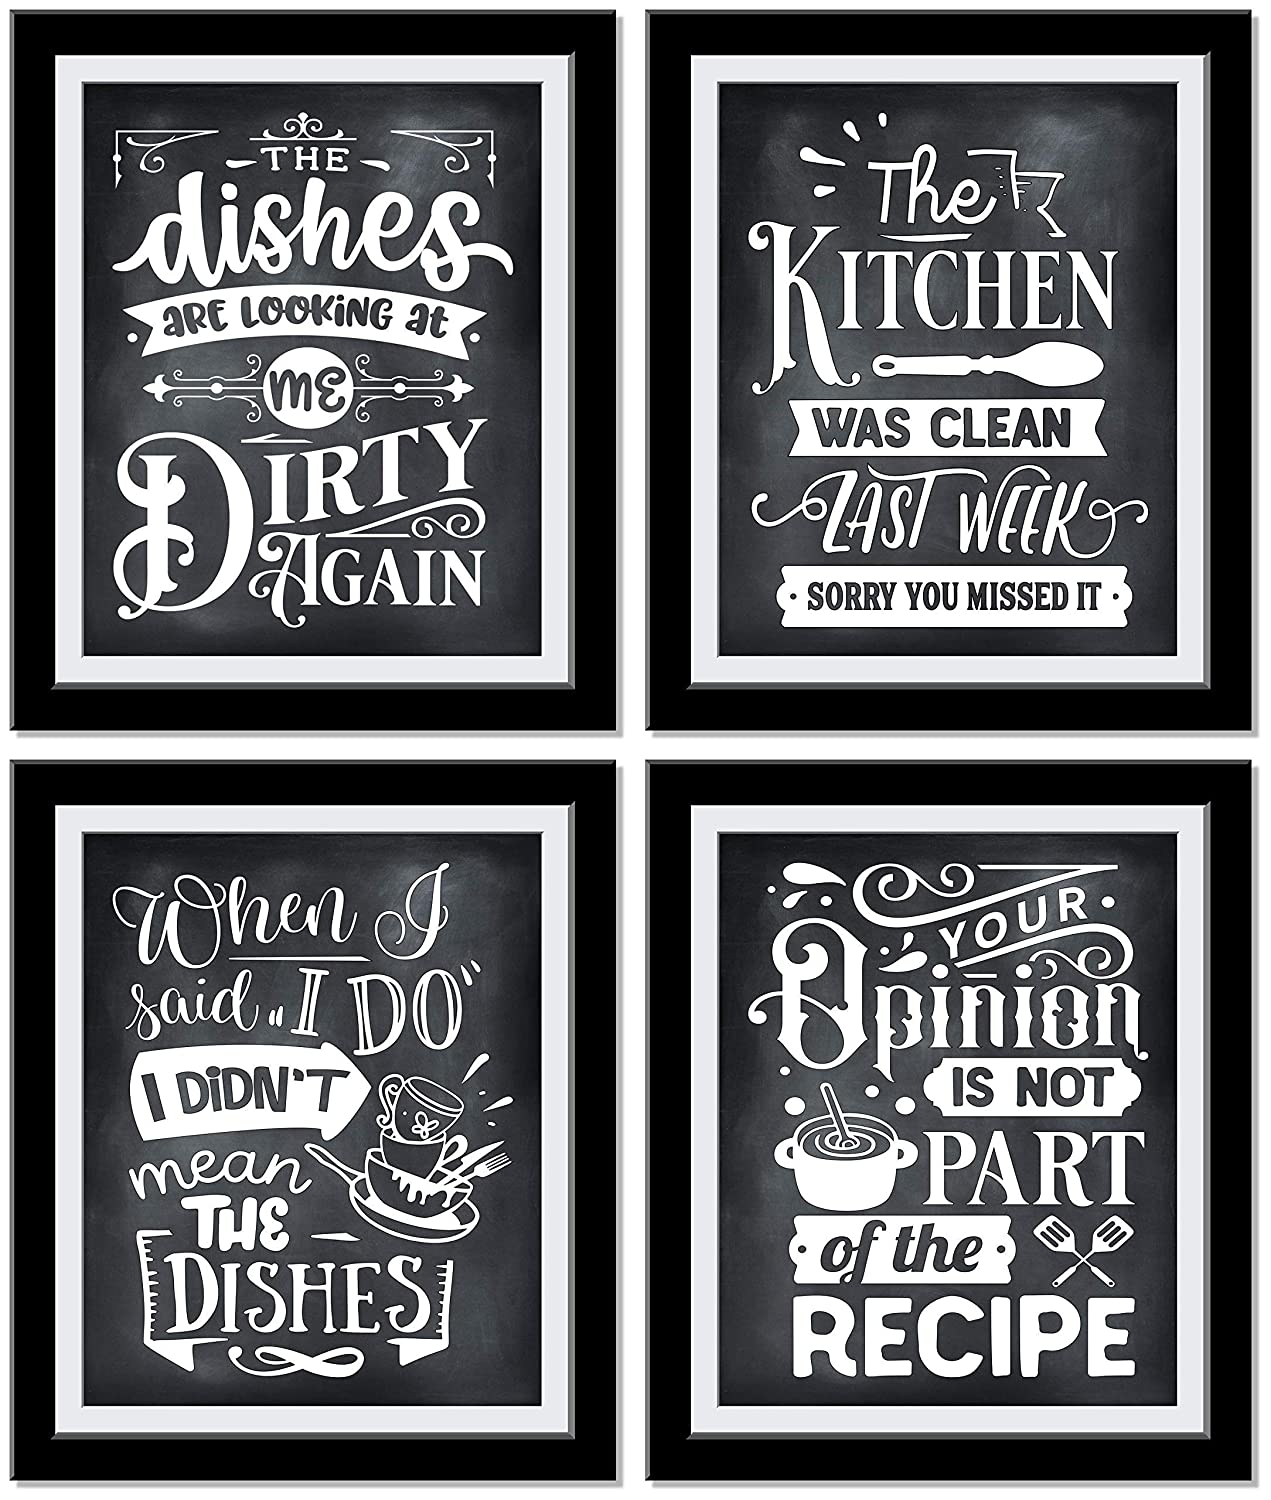 Funny Kitchen Quote The Dishes Are Looking At Me Dirty Again Metal